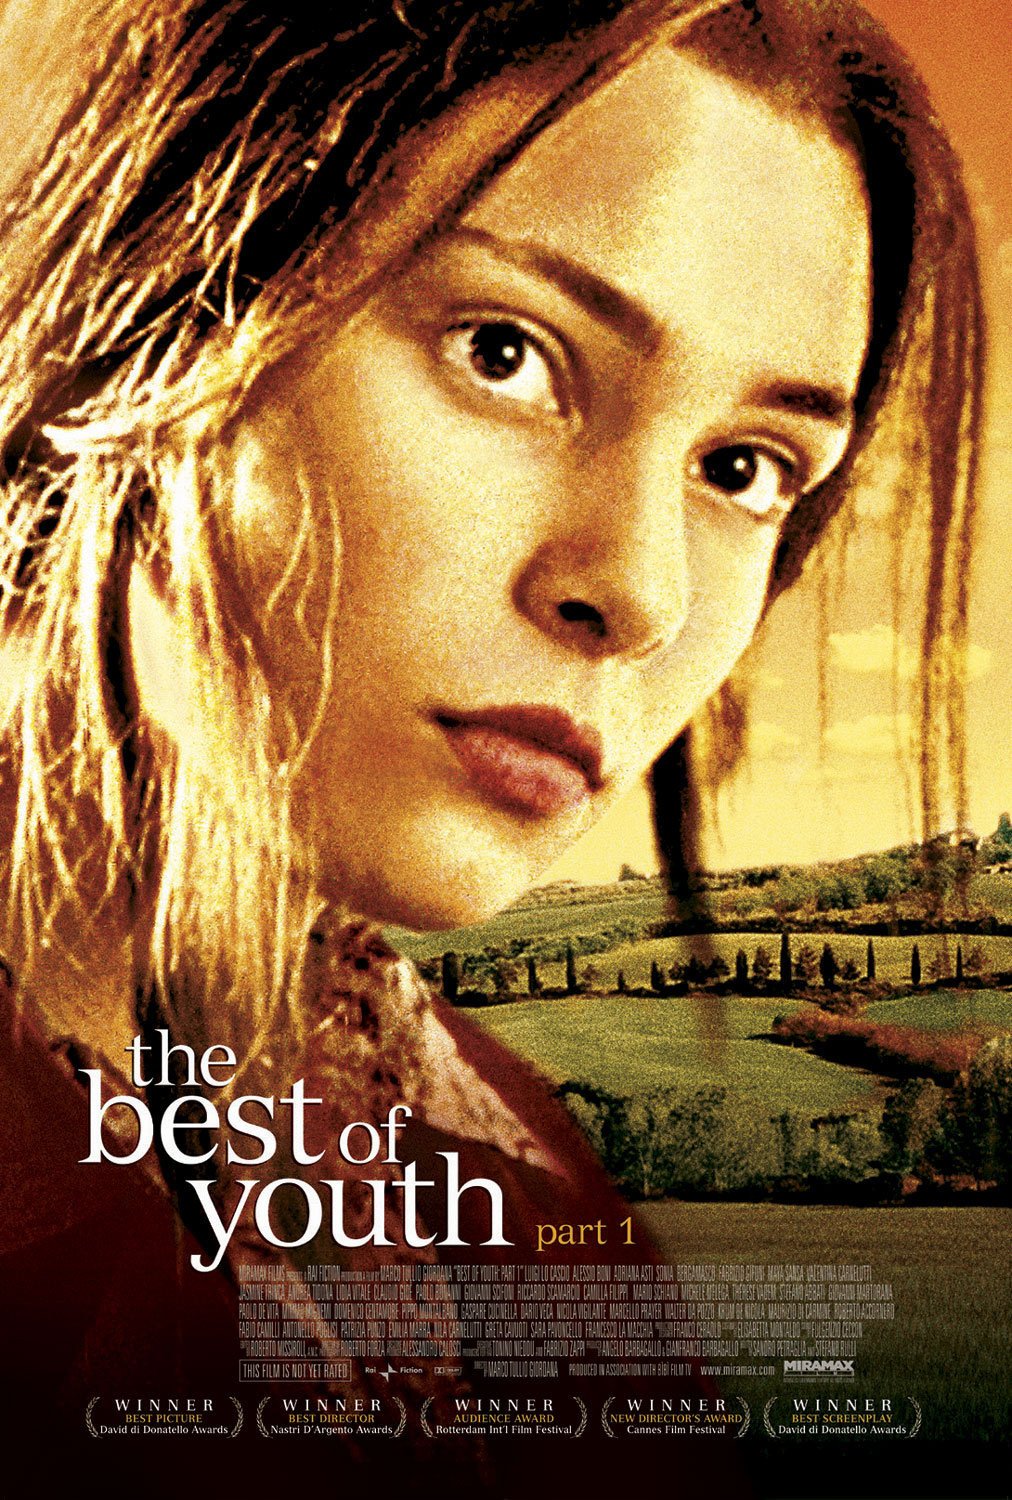 The Best of Youth (La meglio gioventù)